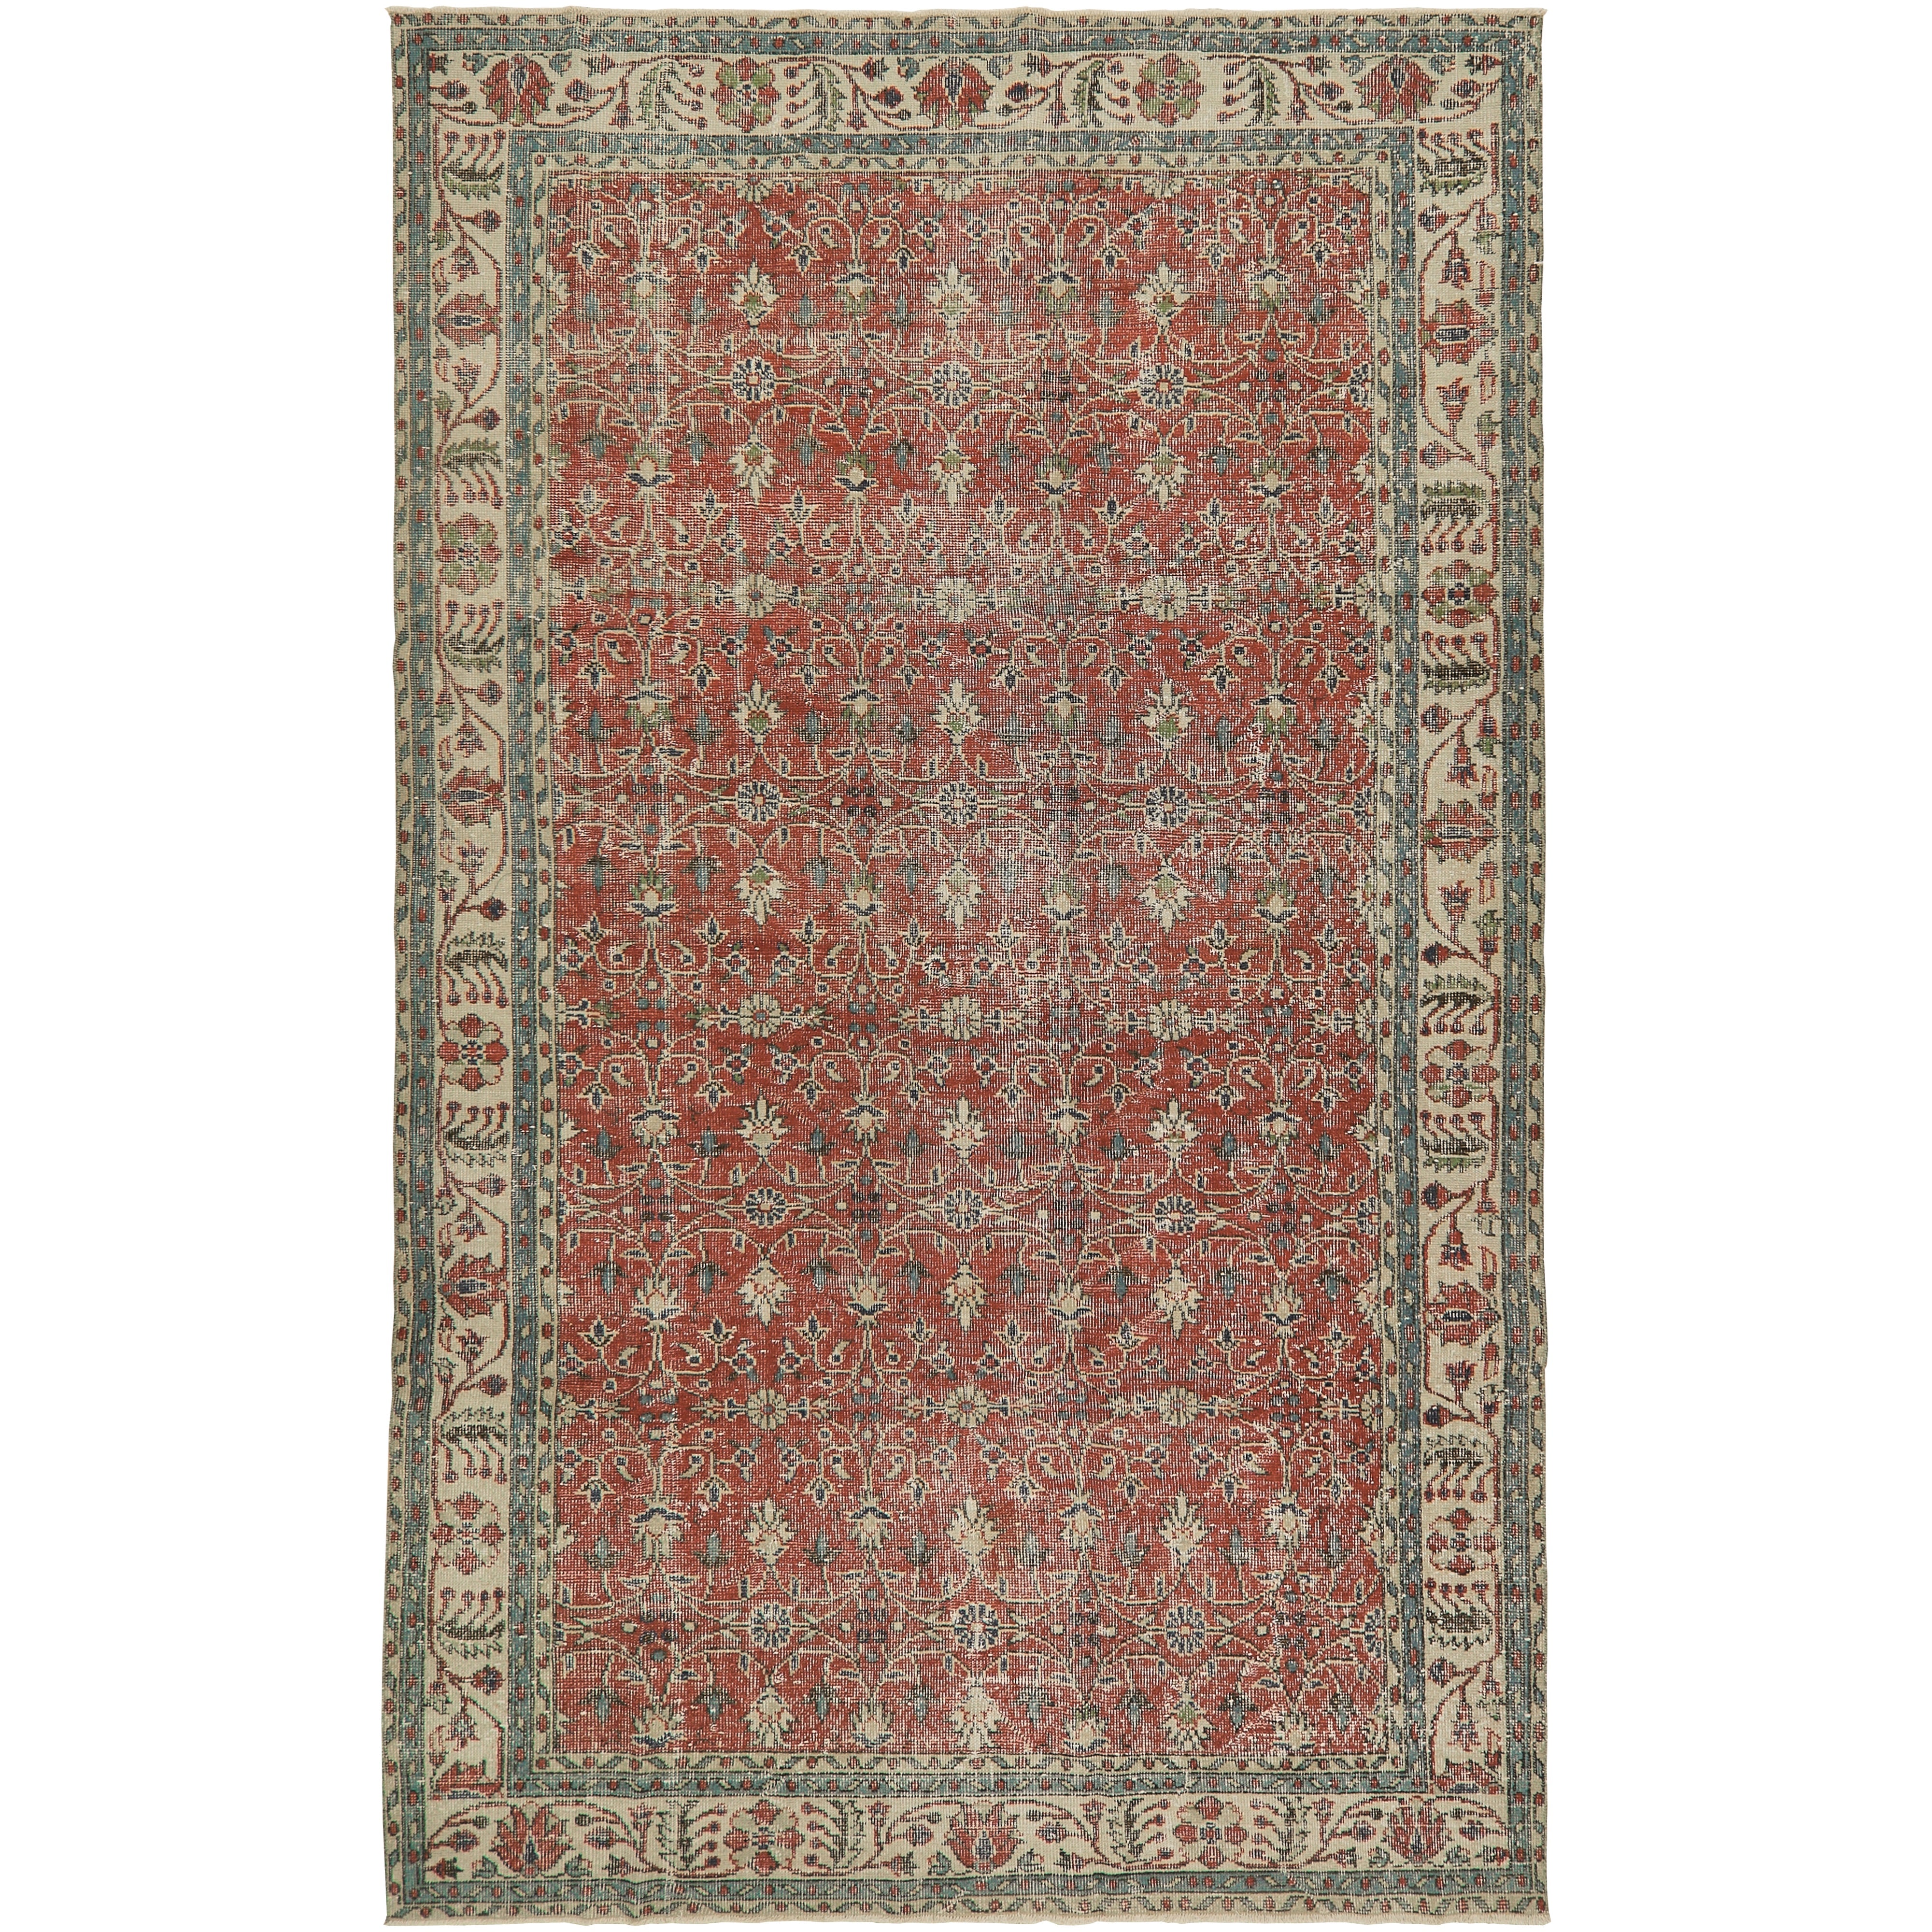 Emi - A Tapestry of Tradition | Kuden Rugs